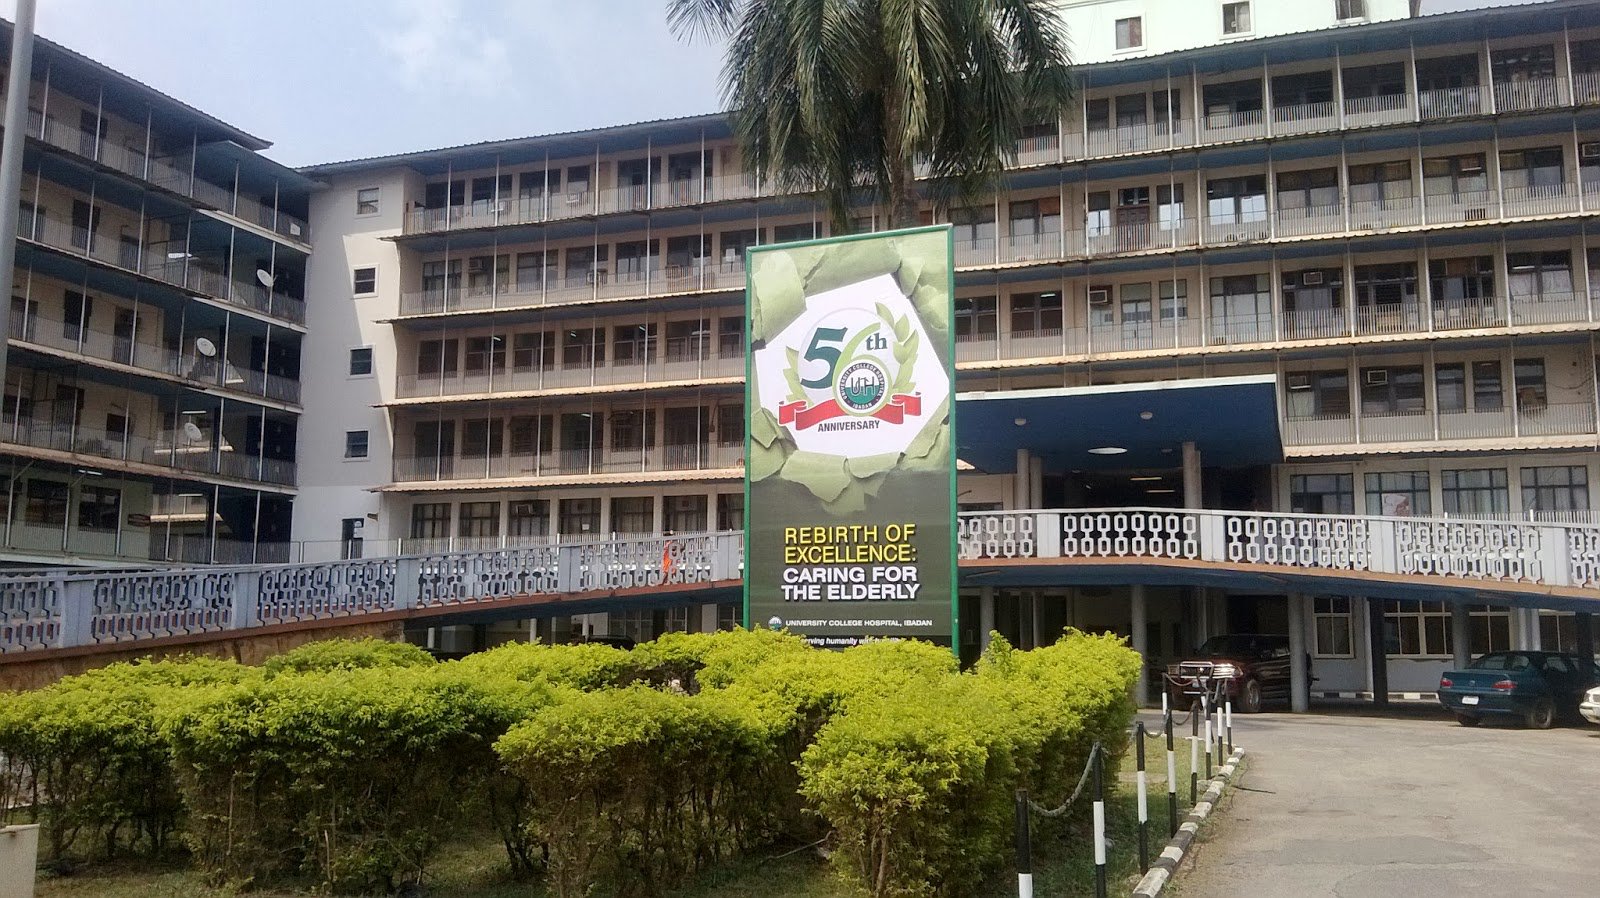 15 health workers resign weekly in UCH- CMD laments